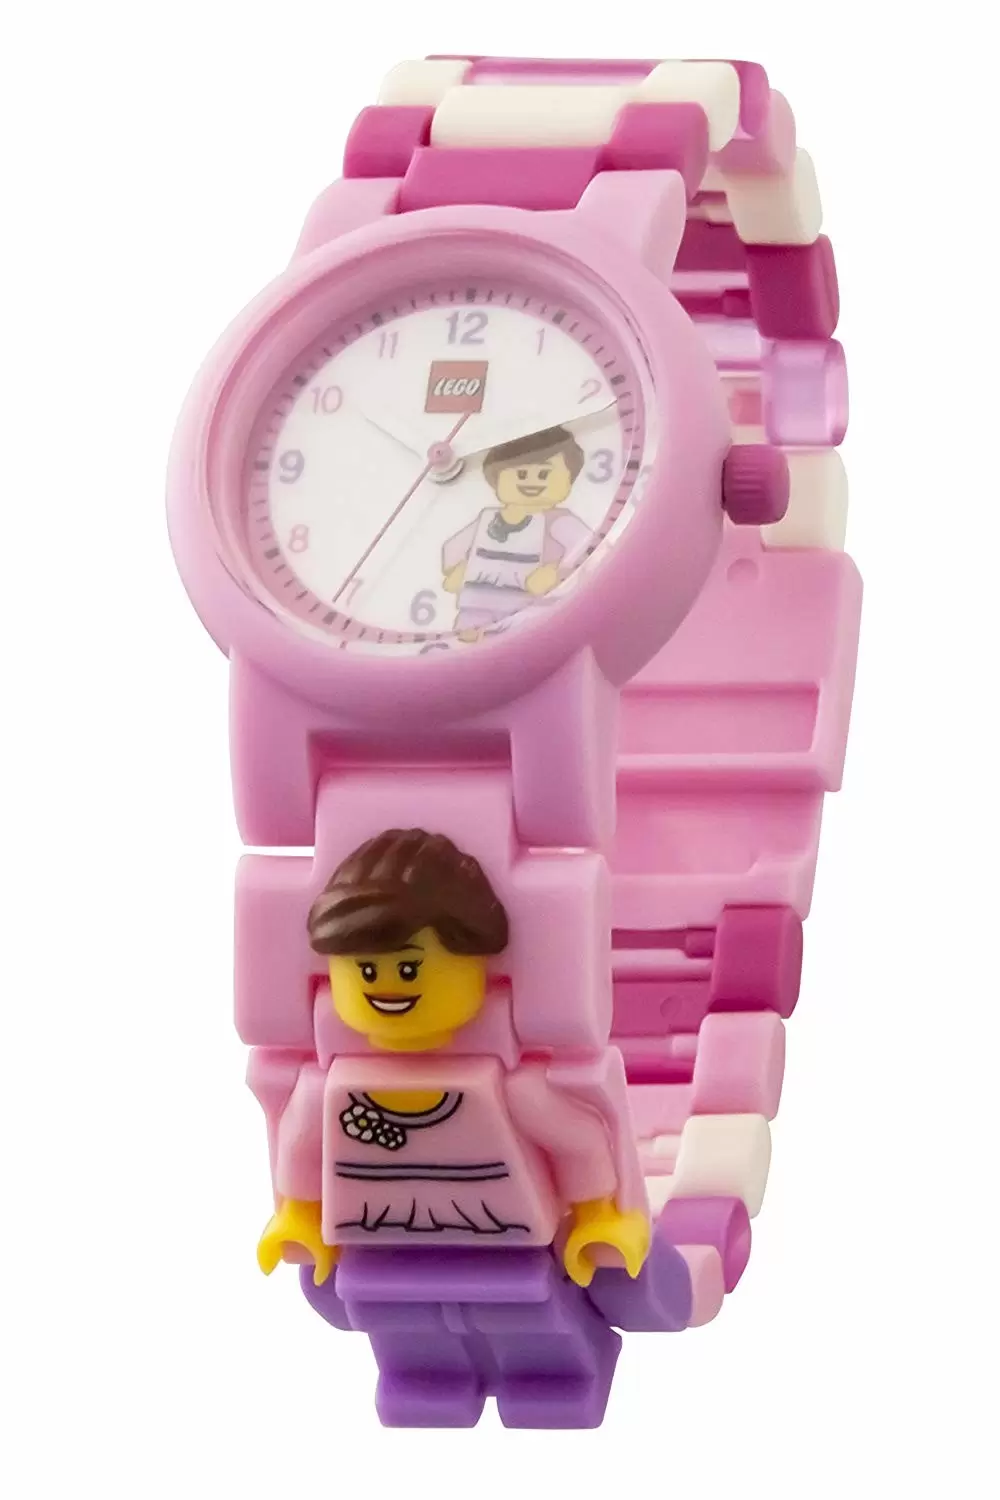 Classic Pink Minifigure Link Watch Watches 8020820